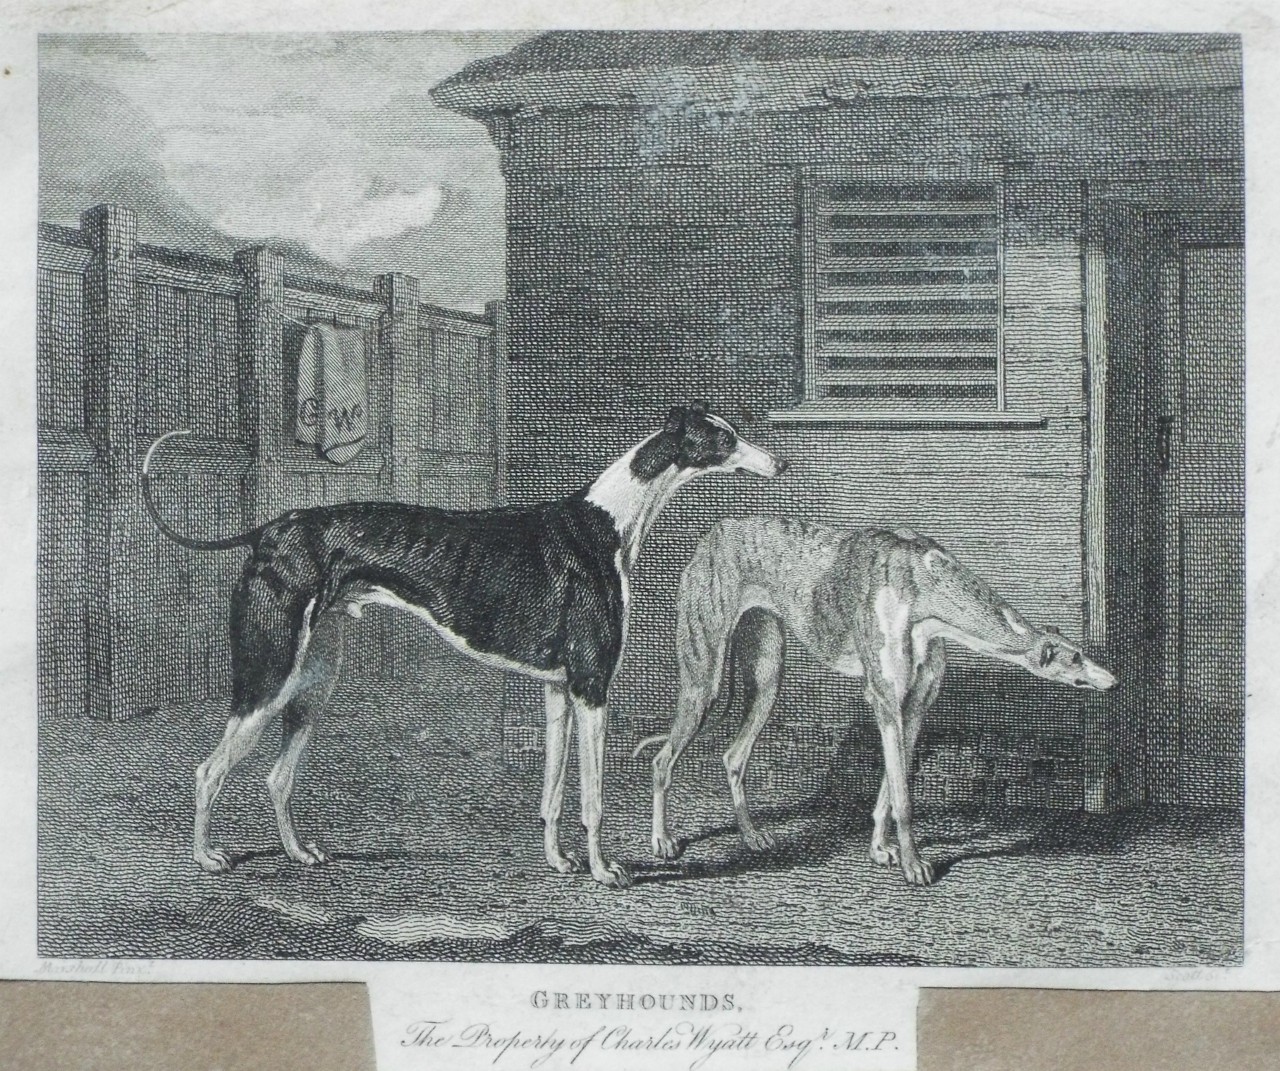 Print - Greyhounds. The Property of Charles WyattEsqr. M.P. - 